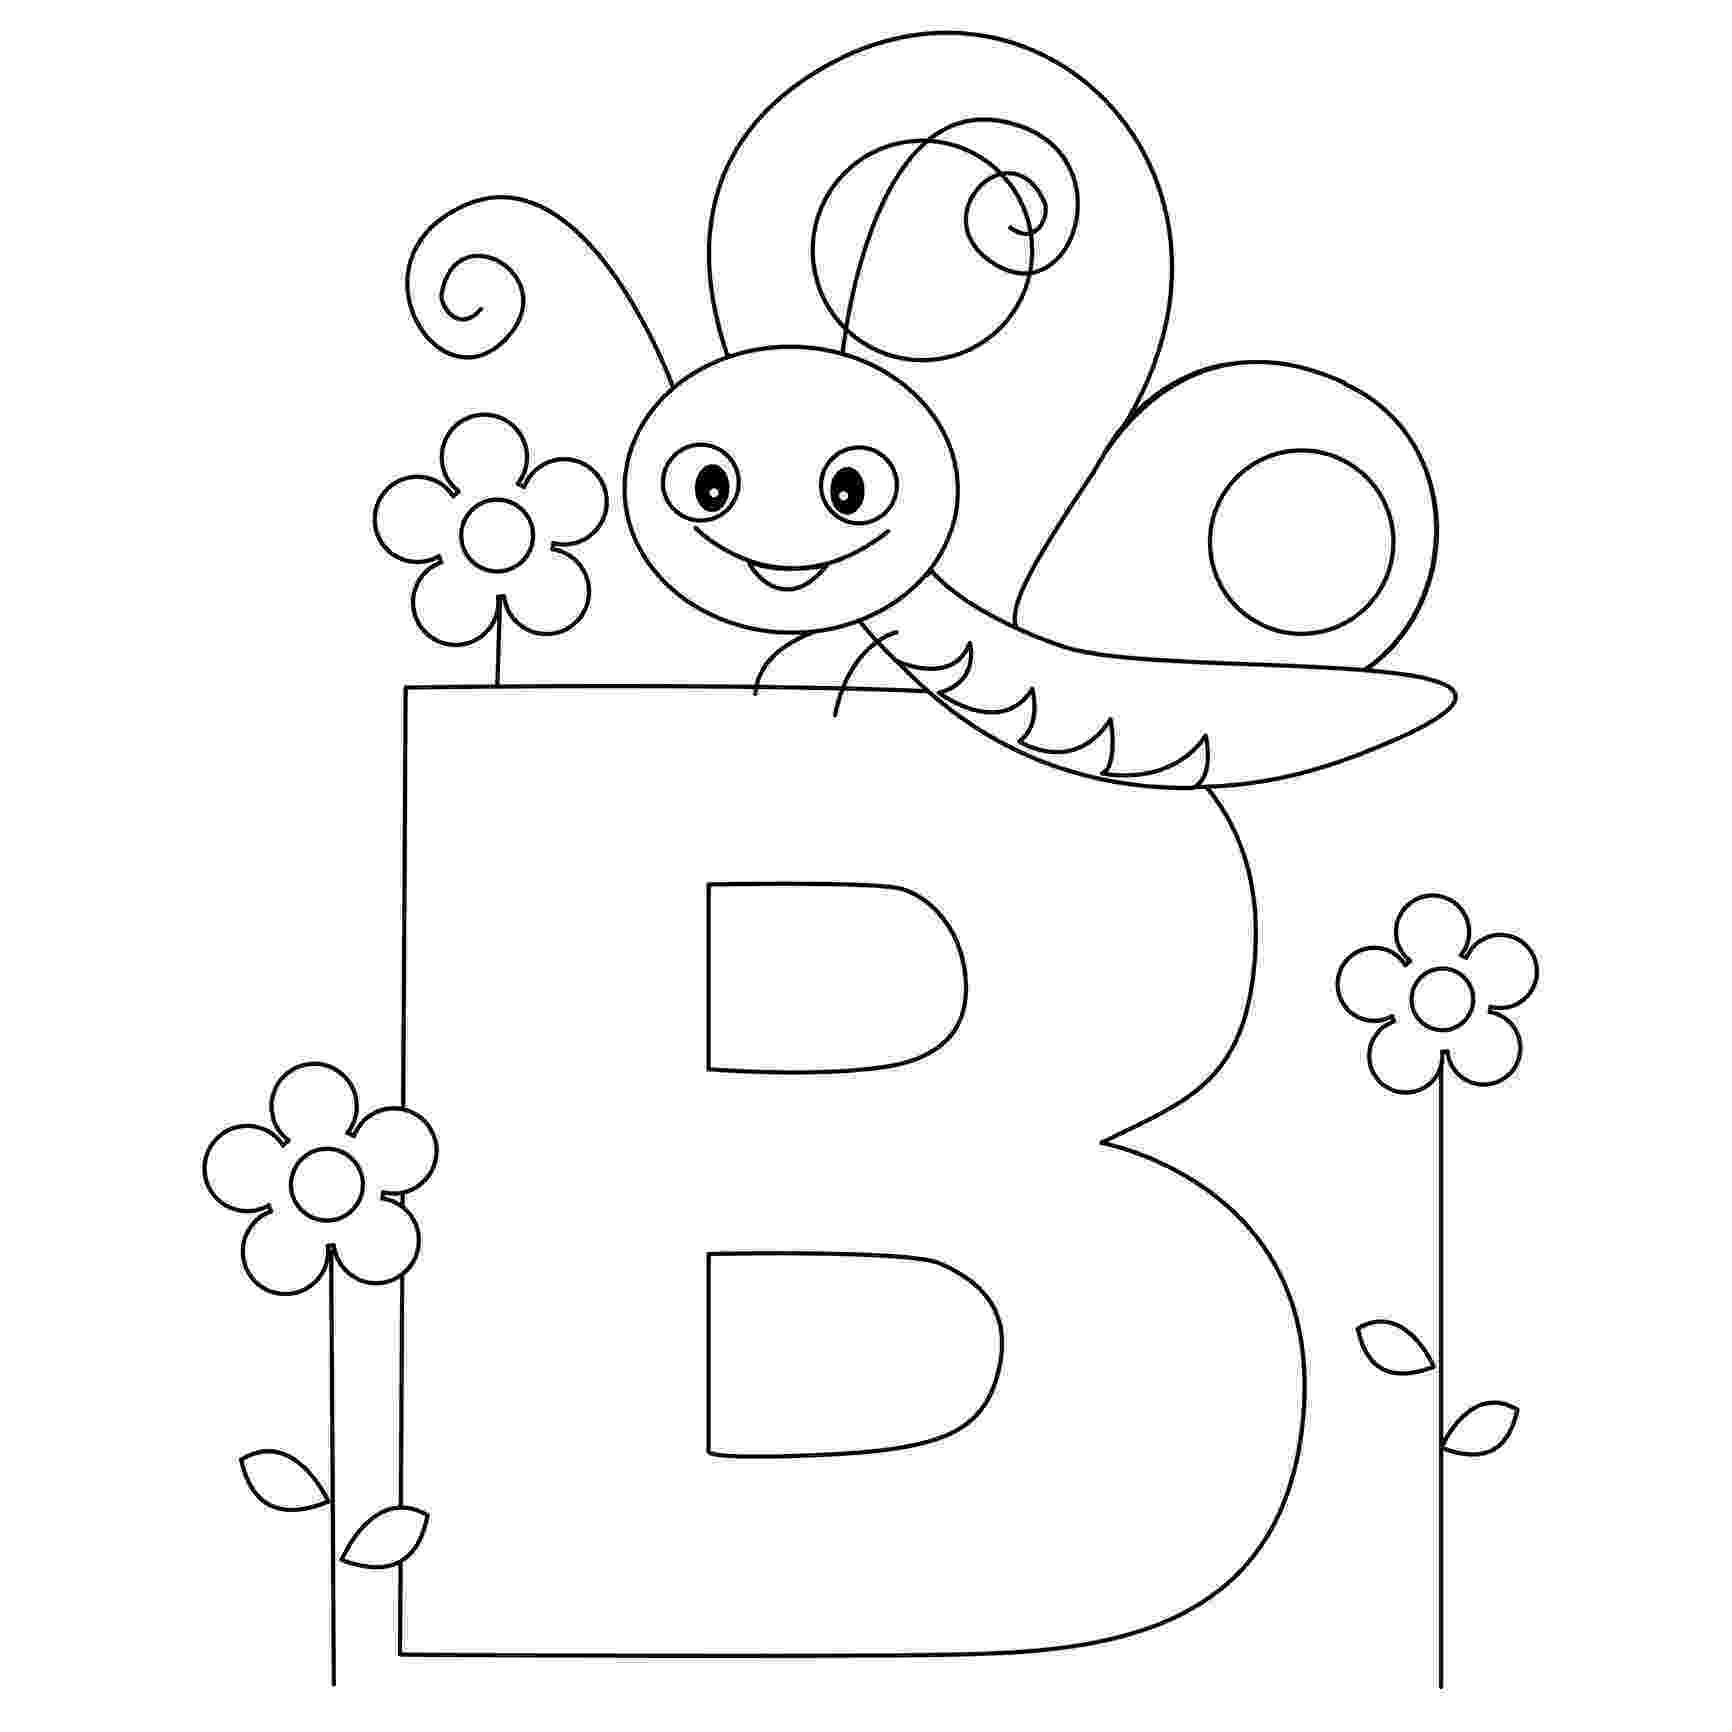 coloring pages of letters free printable alphabet coloring pages for kids best coloring pages letters of 